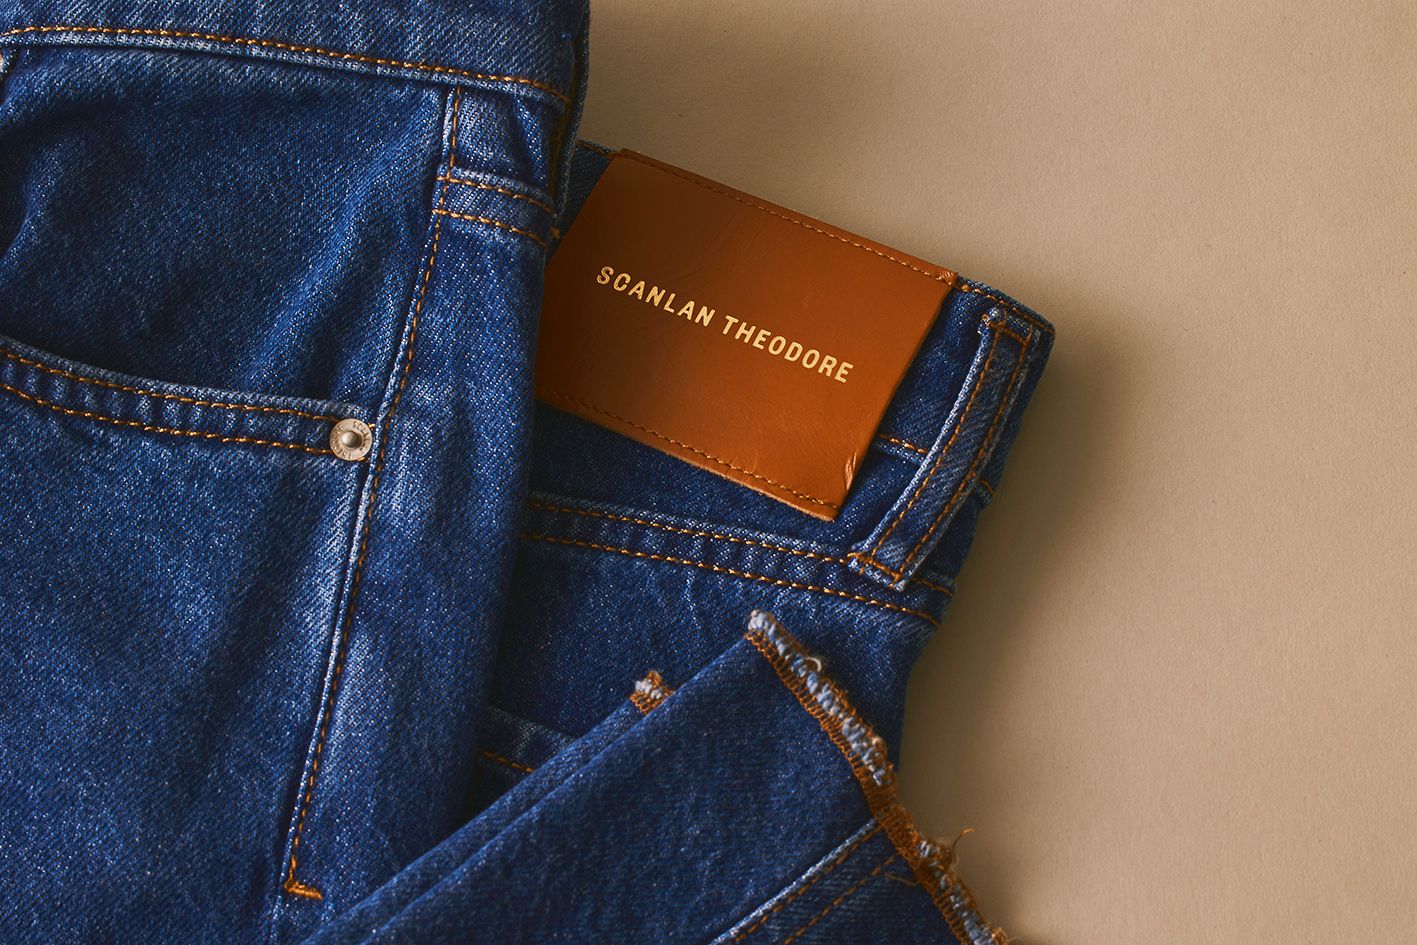 Scanlan Theodore denim jeans in a deep indigo hue and signature patch at back.